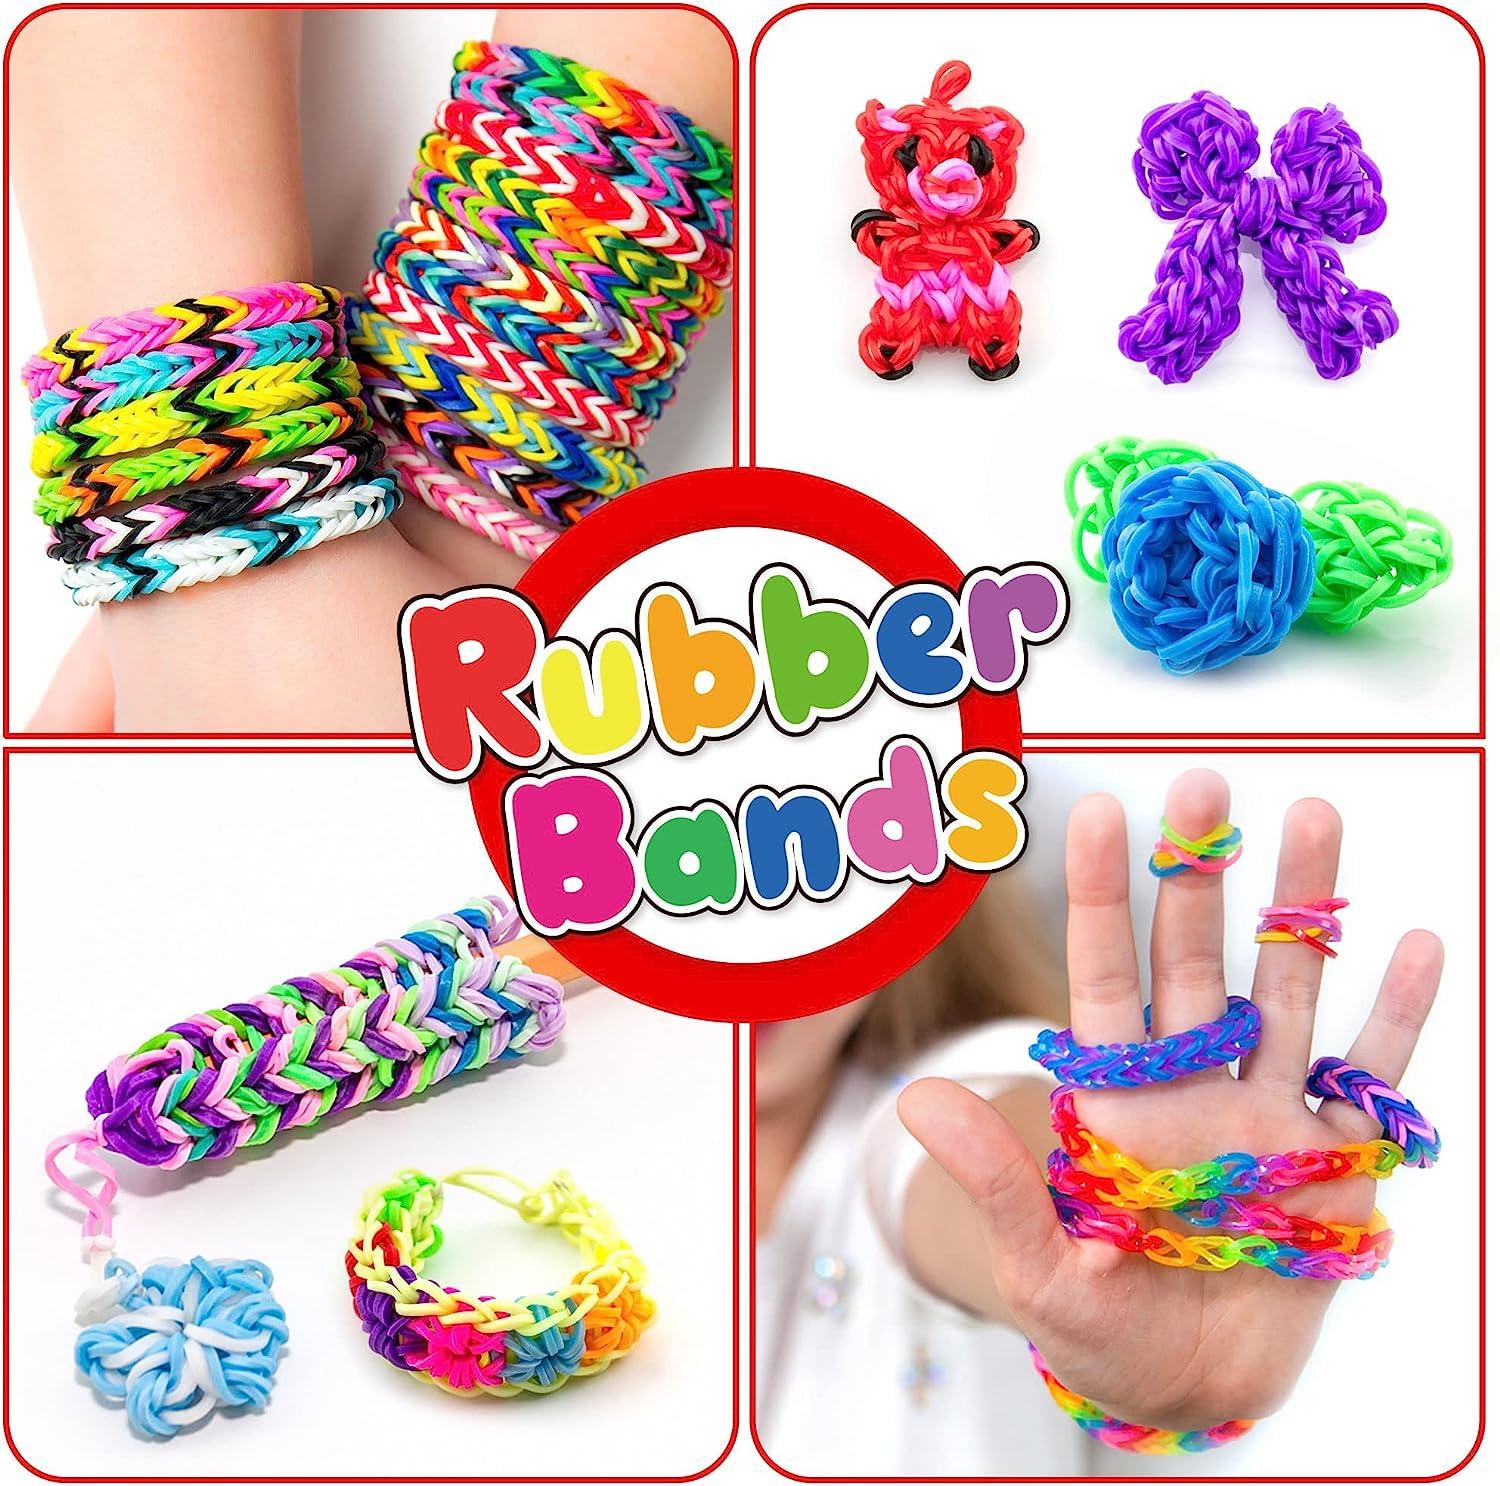 Loom Bands Refill, Looming Bands, Loom Rubber Band Refill Kit, 4500+  Colorful Rubber Bands Set, Friendship Bracelet Making Kit, Weaving DIY  Craft Birt